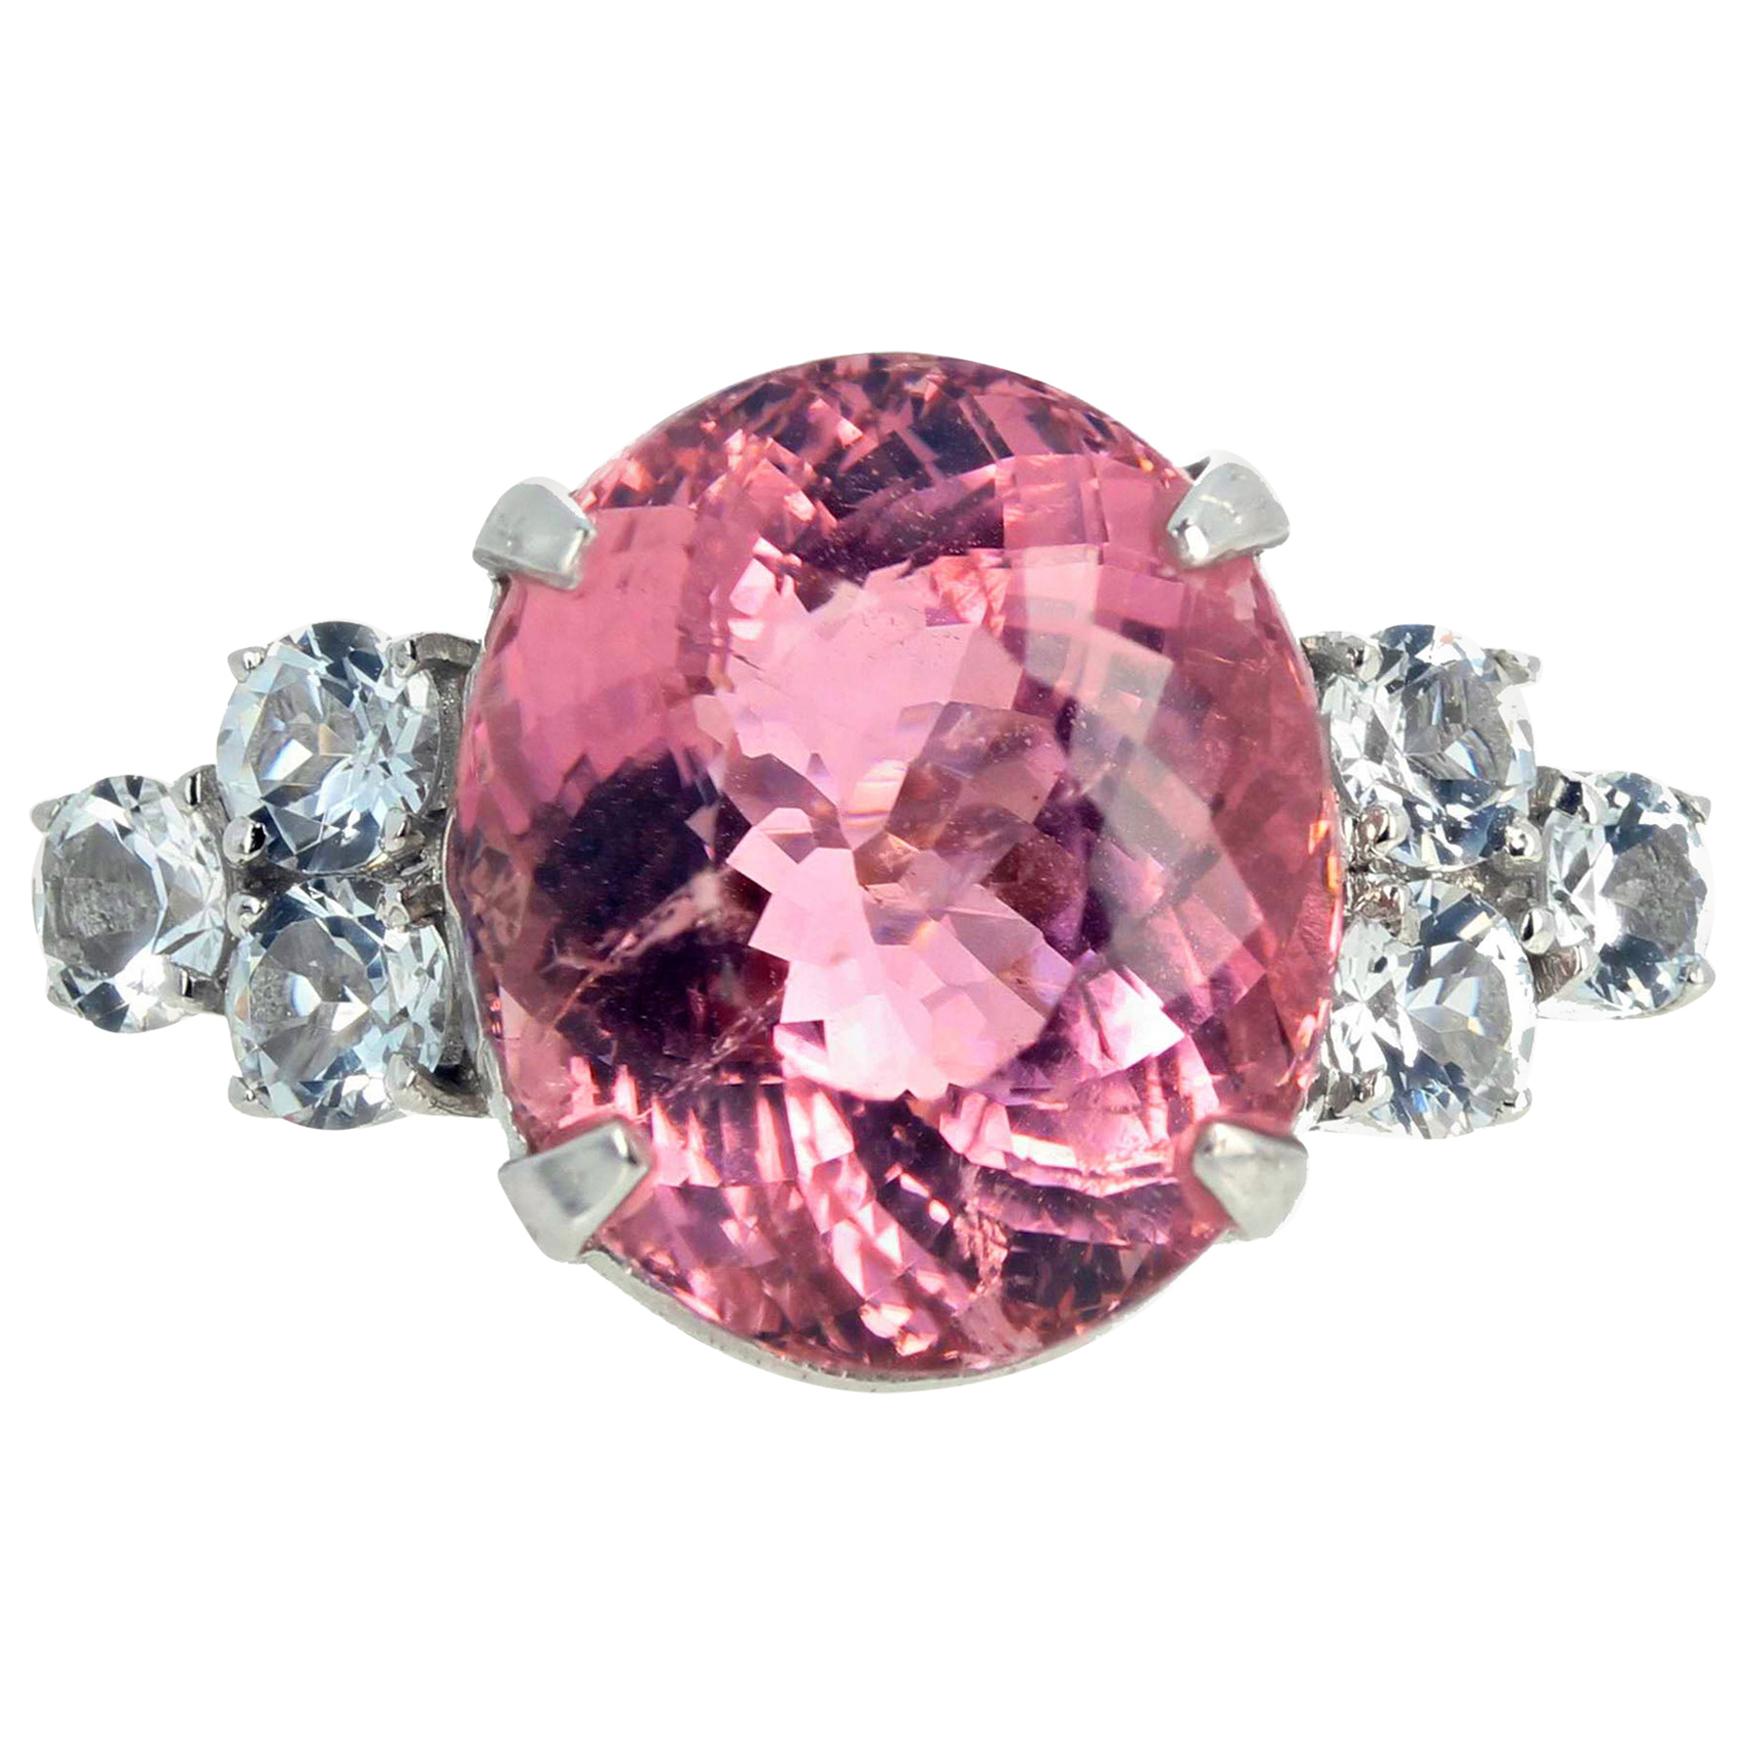 AJD CLEAR GORGEOUS 14.38 Ct Sparkling Pink Tourmaline & Real White Zircons Ring For Sale